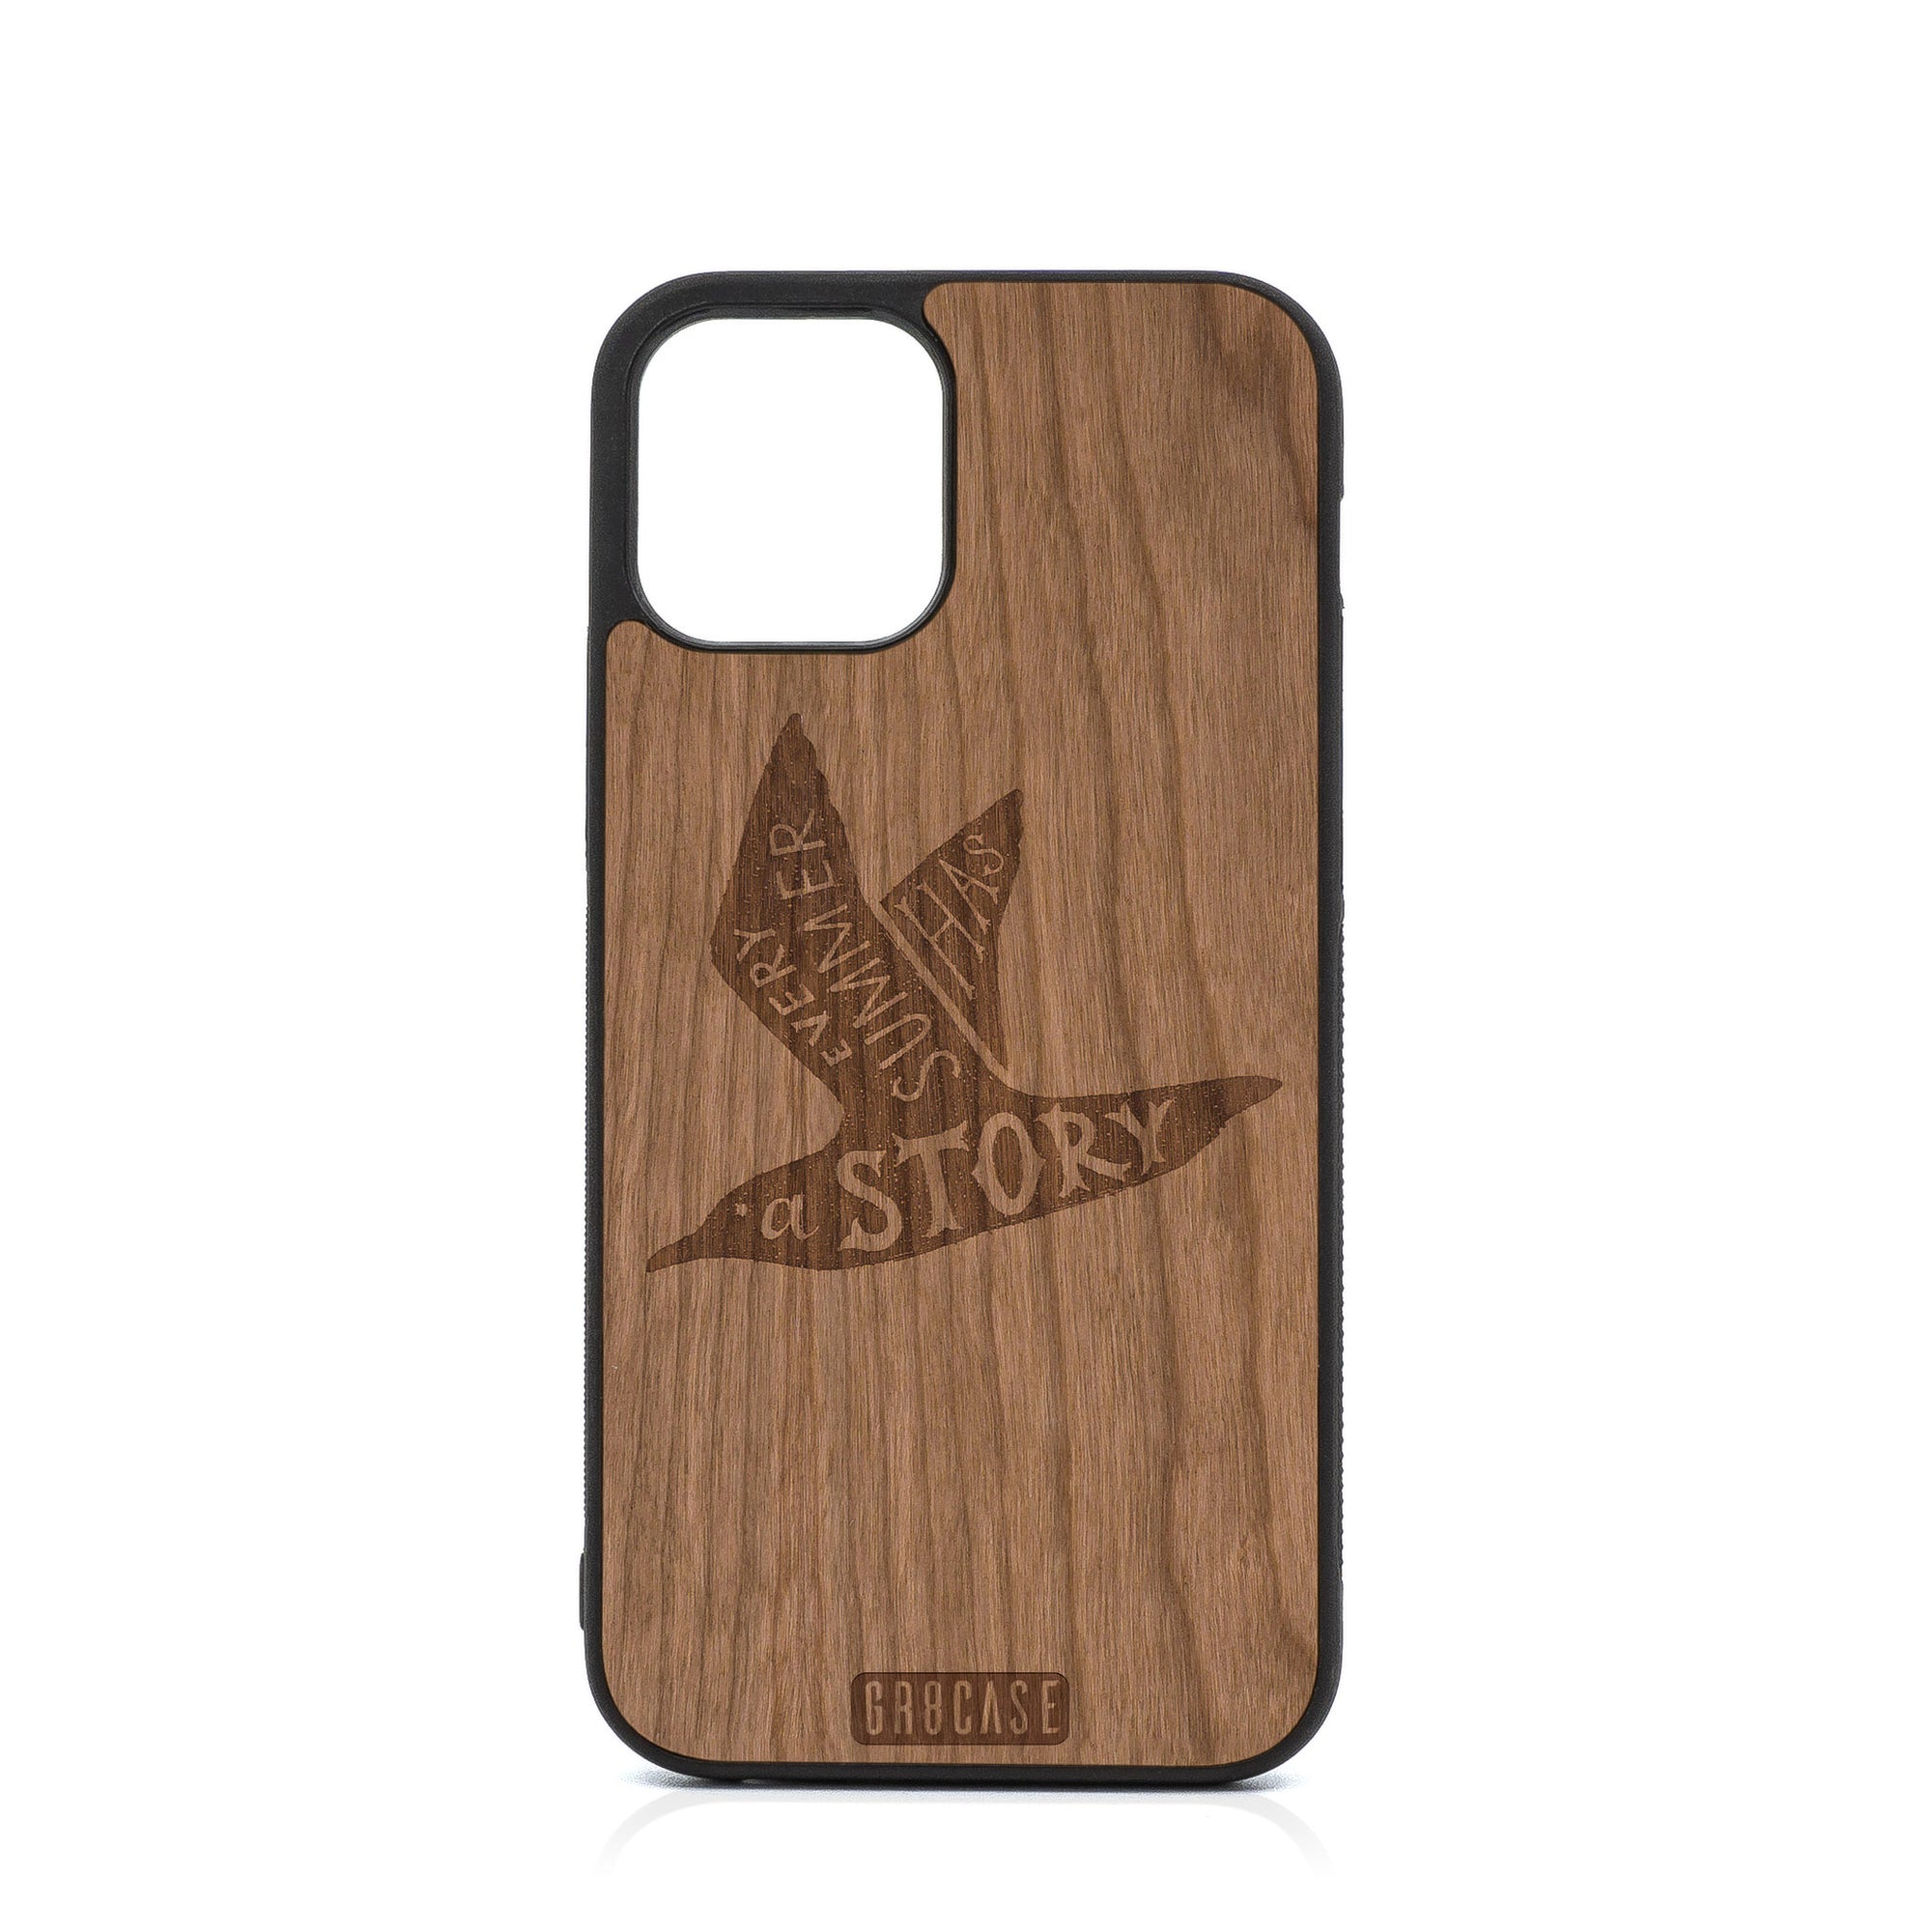 Every Summer Has A Story (Seagull) Design Wood Case For iPhone 12